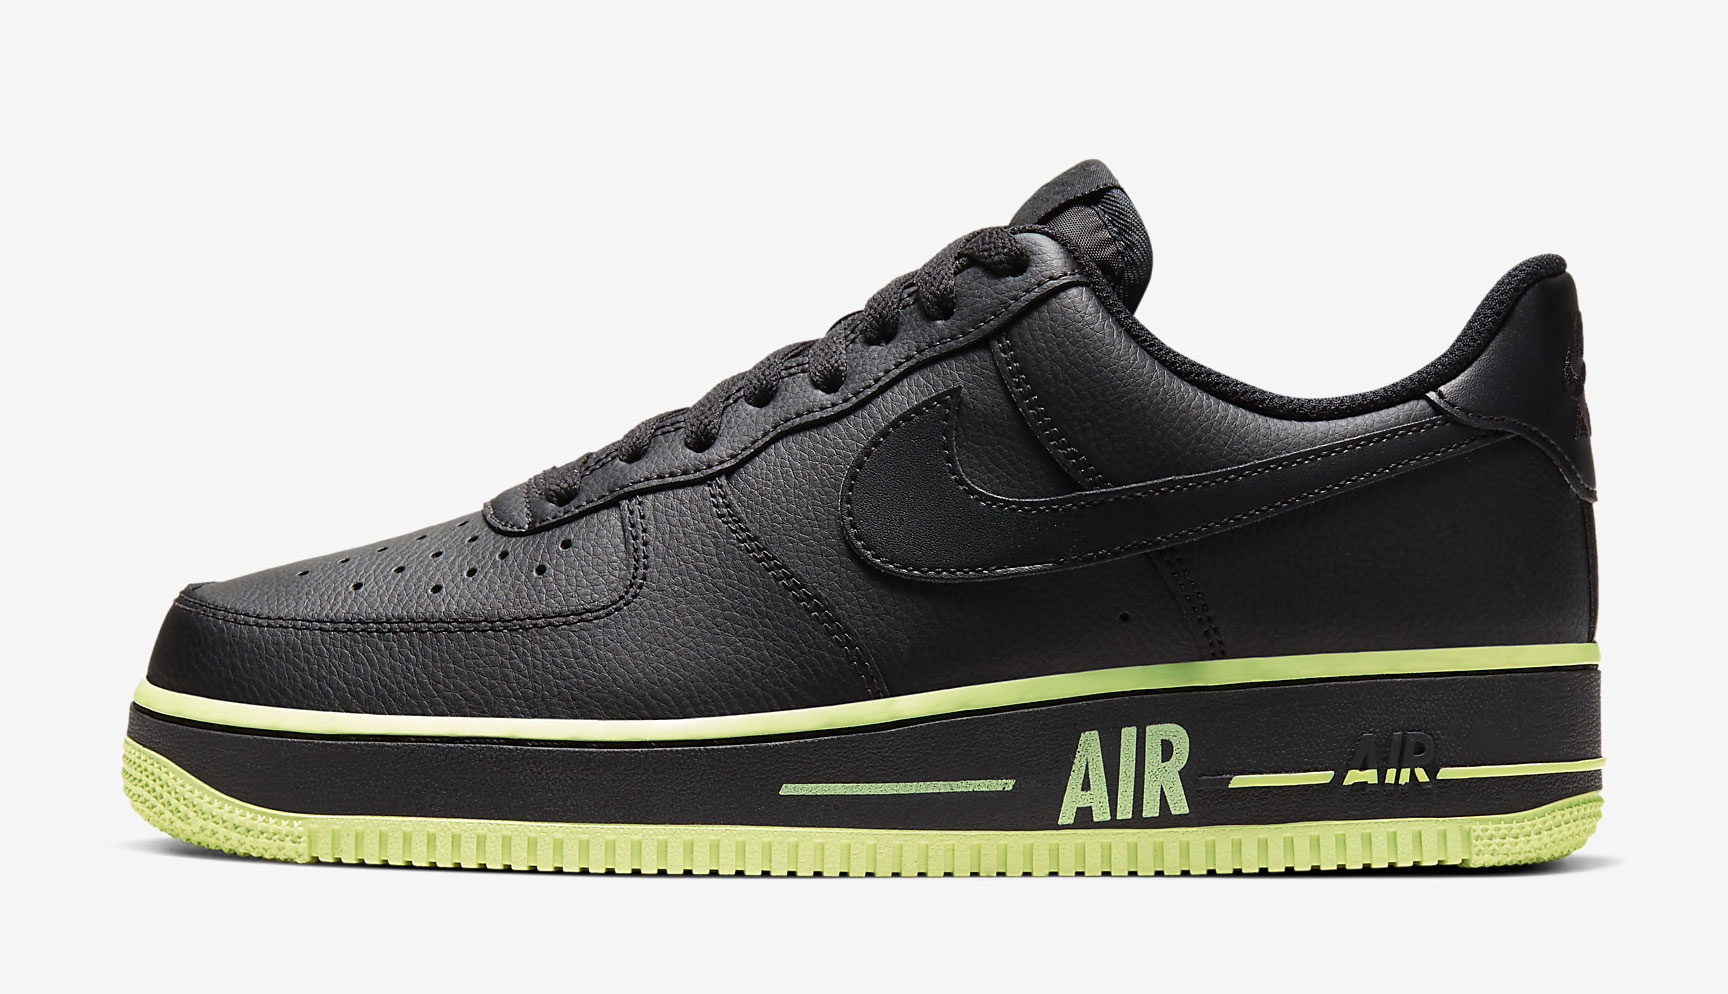 nike-air-force-1-low-lv8-3-black-volt-release-date